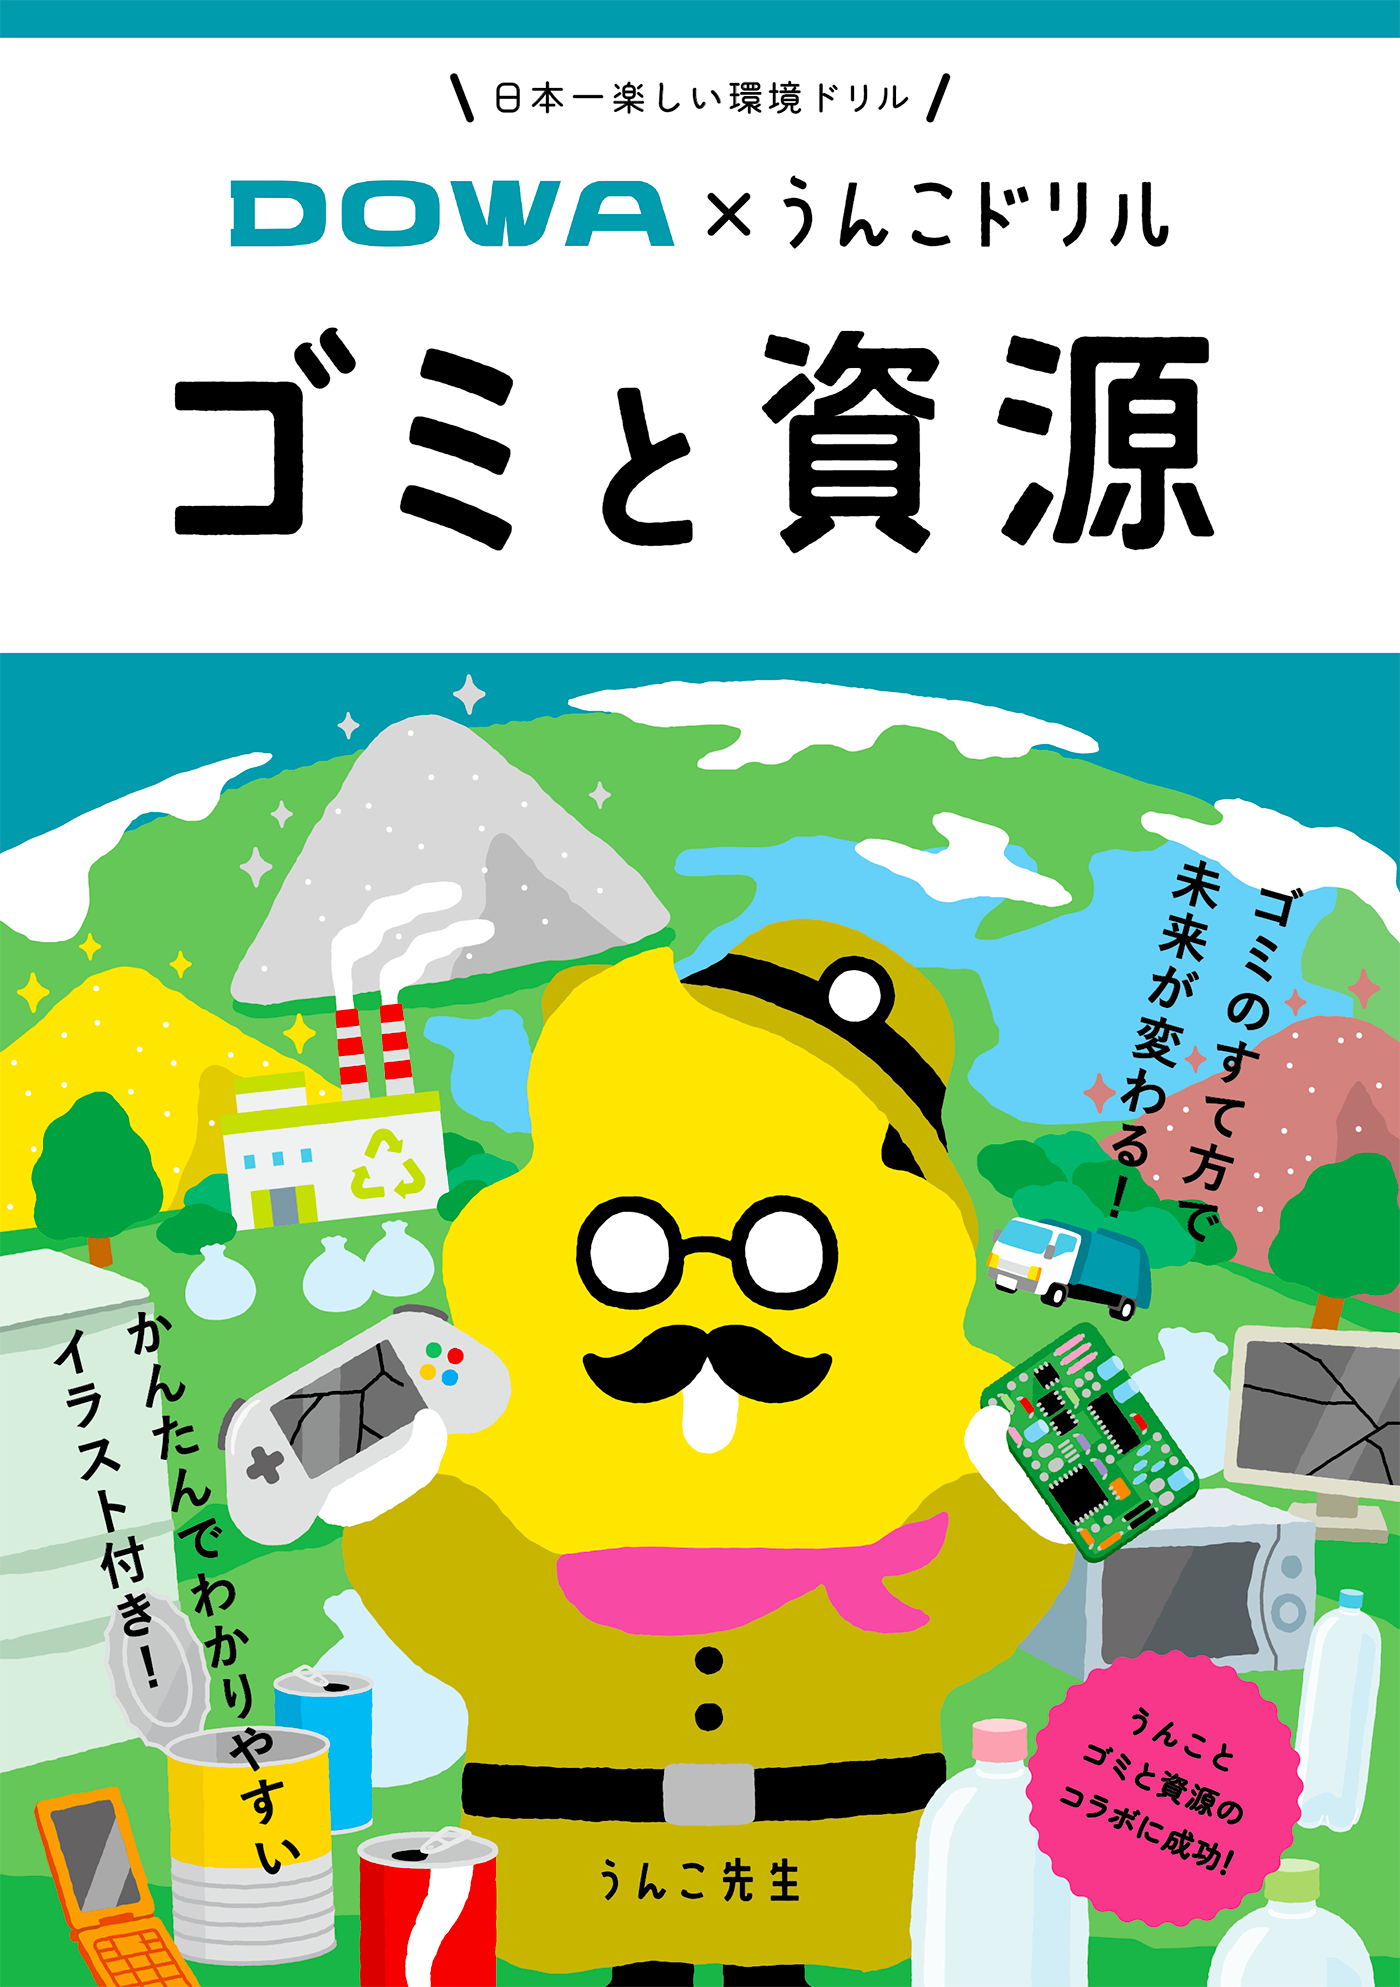 Produced the Booklet "DOWA x Unko Drill Garbage and Resources", a Fun Way to Learn about Waste Problems and Resource Recycling